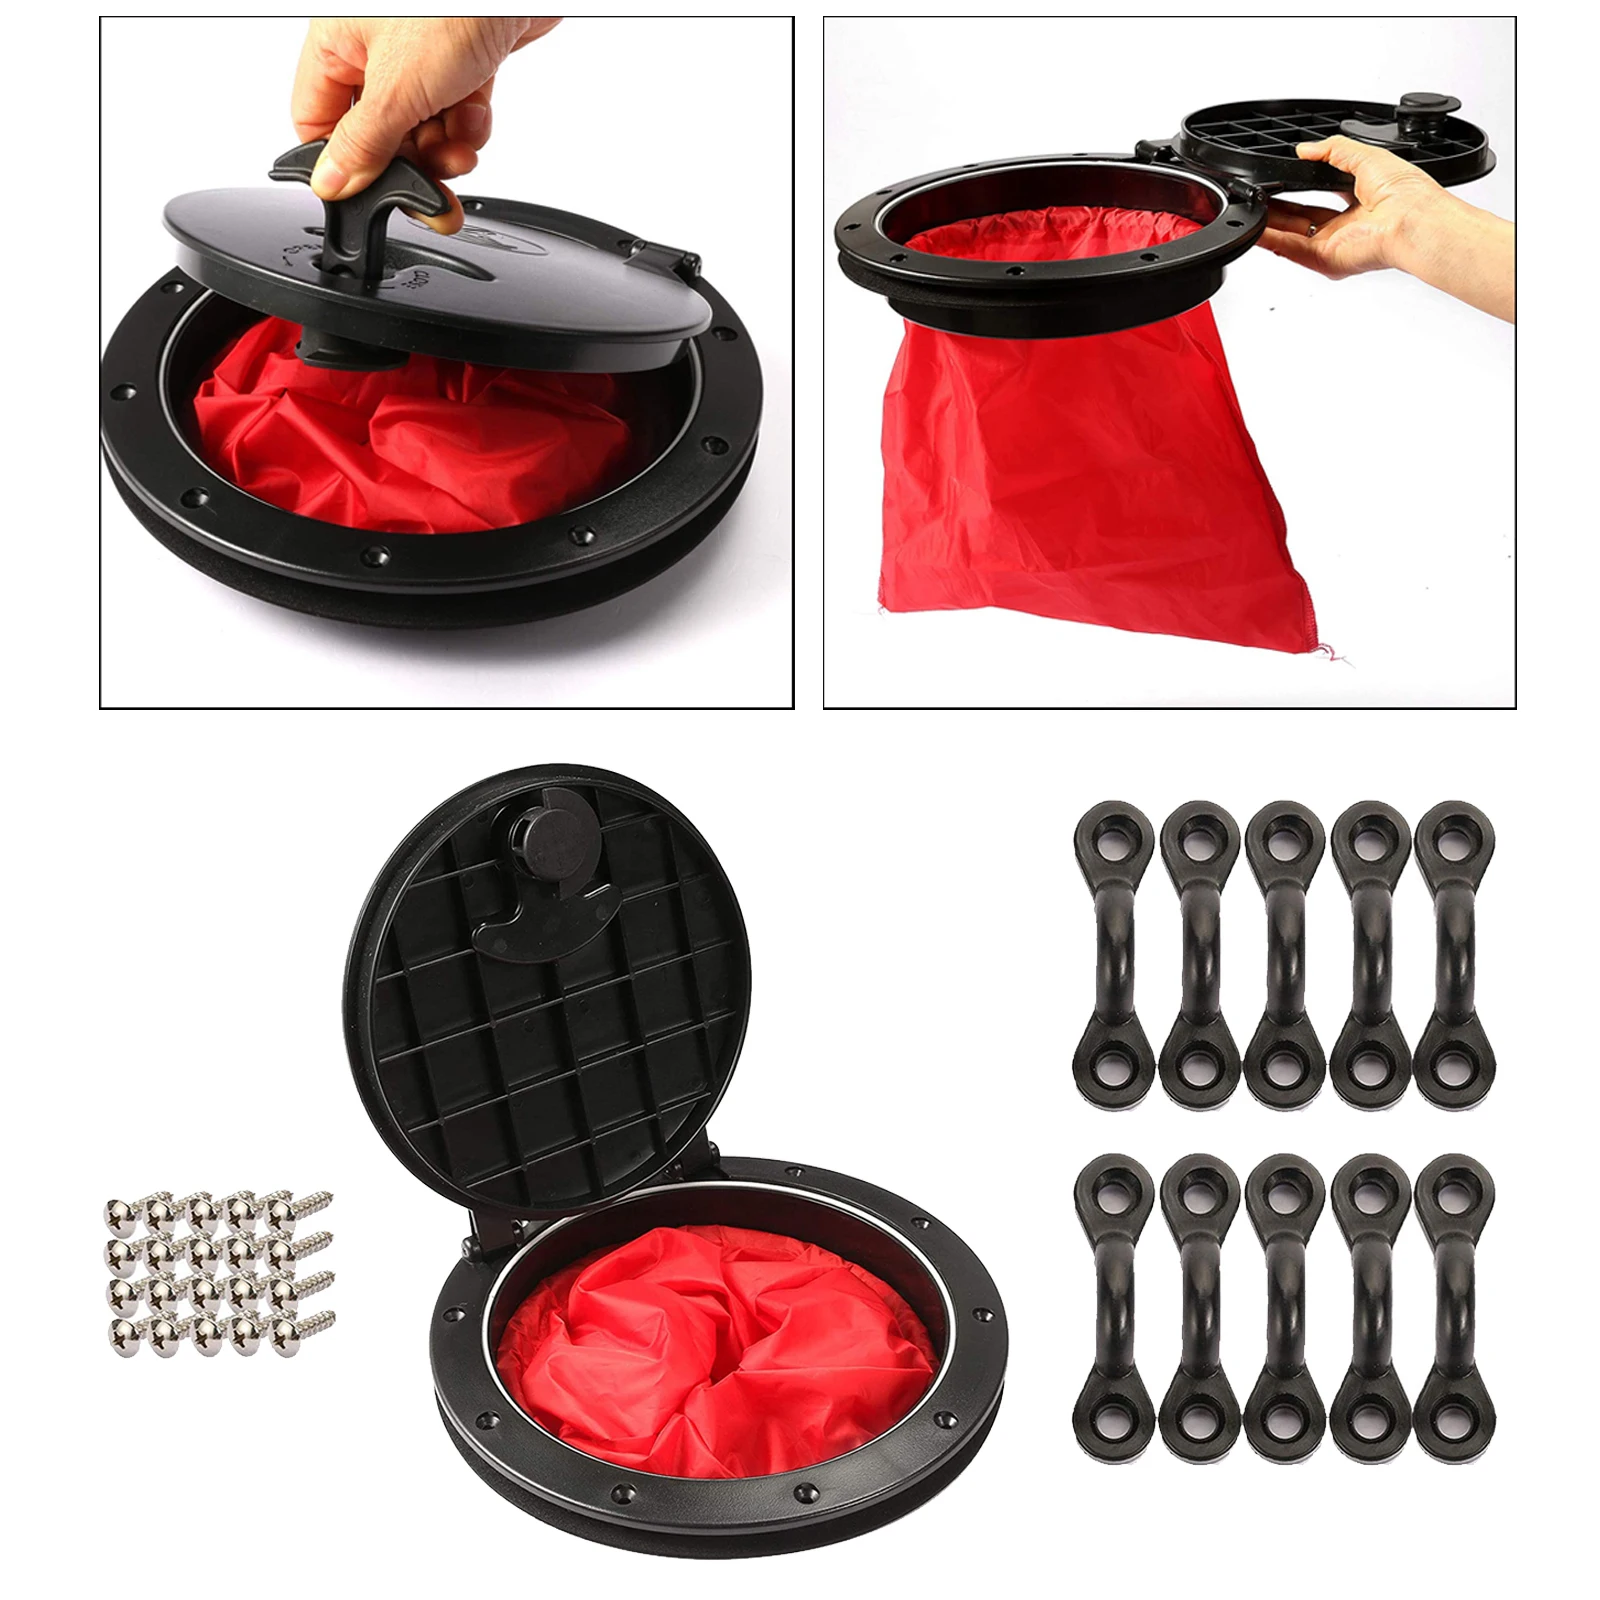 8 inches Kayak Deck Plate Kit Deck Hatch with Storage Bag for Fishing Kayak Boating Inspection Hatches with Cat Bag